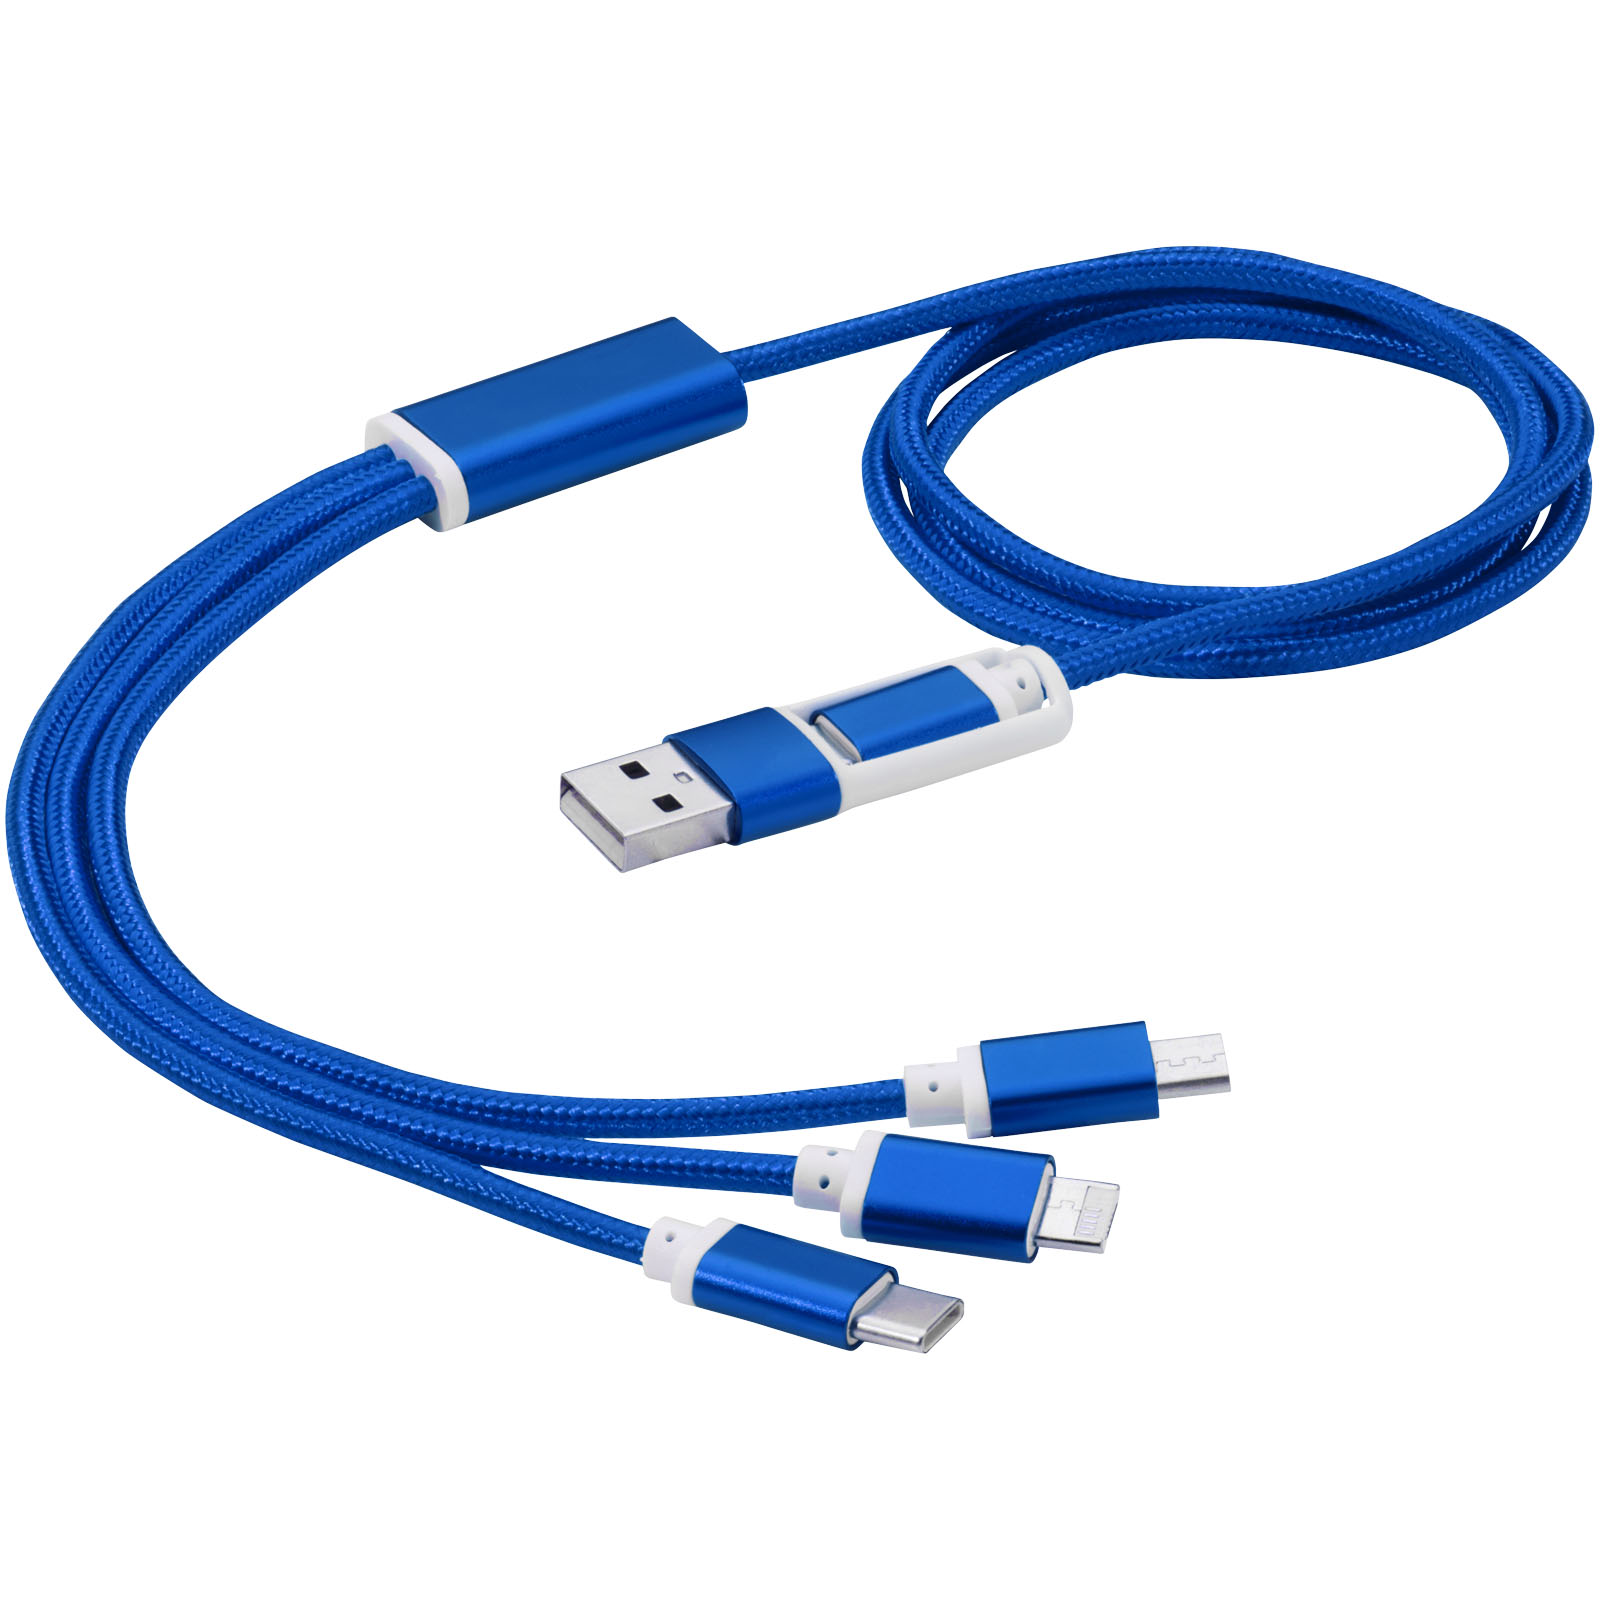 Advertising Cables - Versatile 5-in-1 charging cable